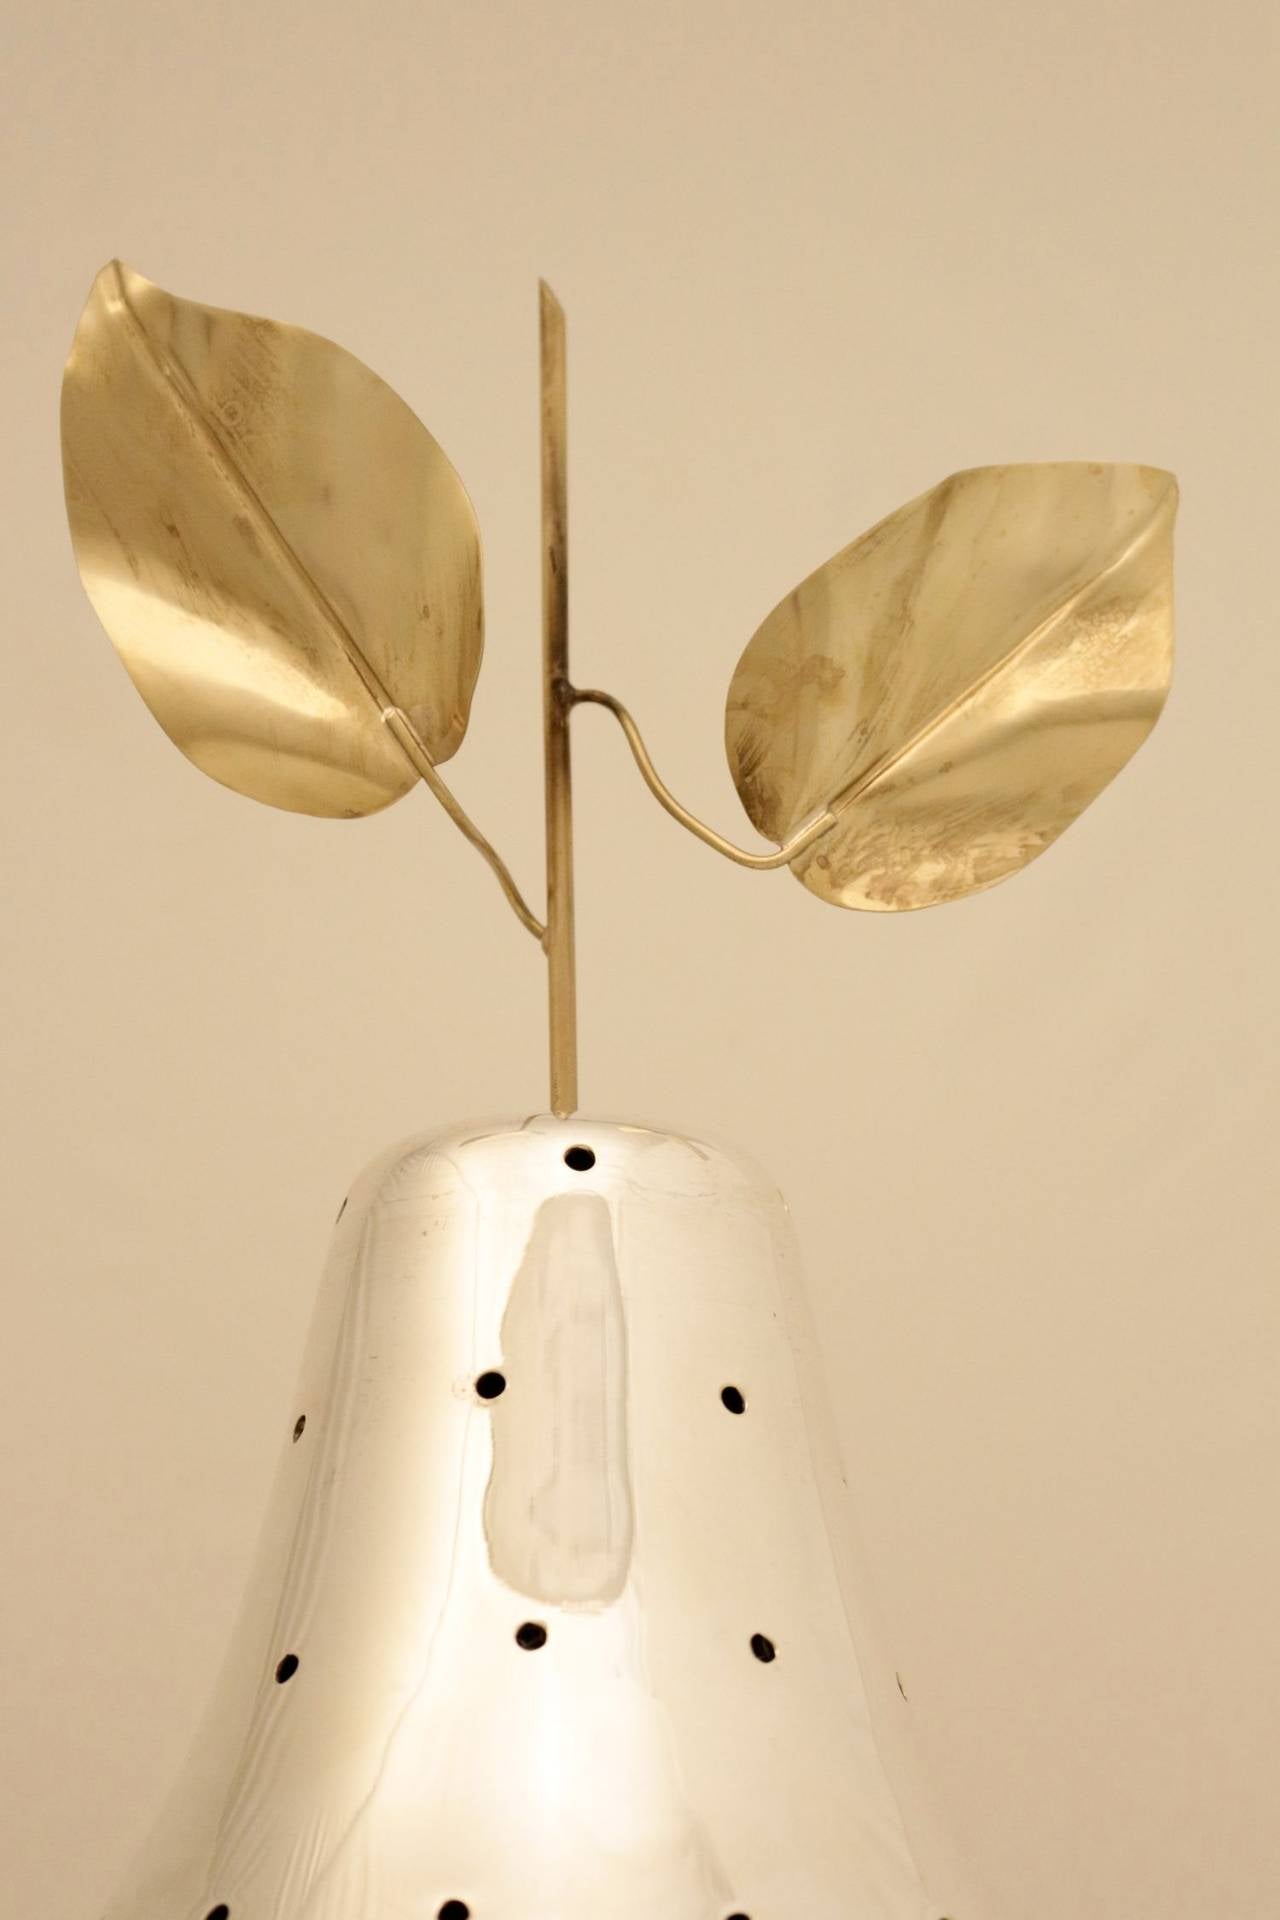 1970s 'Pear' cocktail stand. Decorative and useful object. 
The pear shaped body is decorated with regular holes serving as holders for cocktail picks for fruits or other food. 
One rod and two leaves in gilt brass embellishes the pear. 
The pear